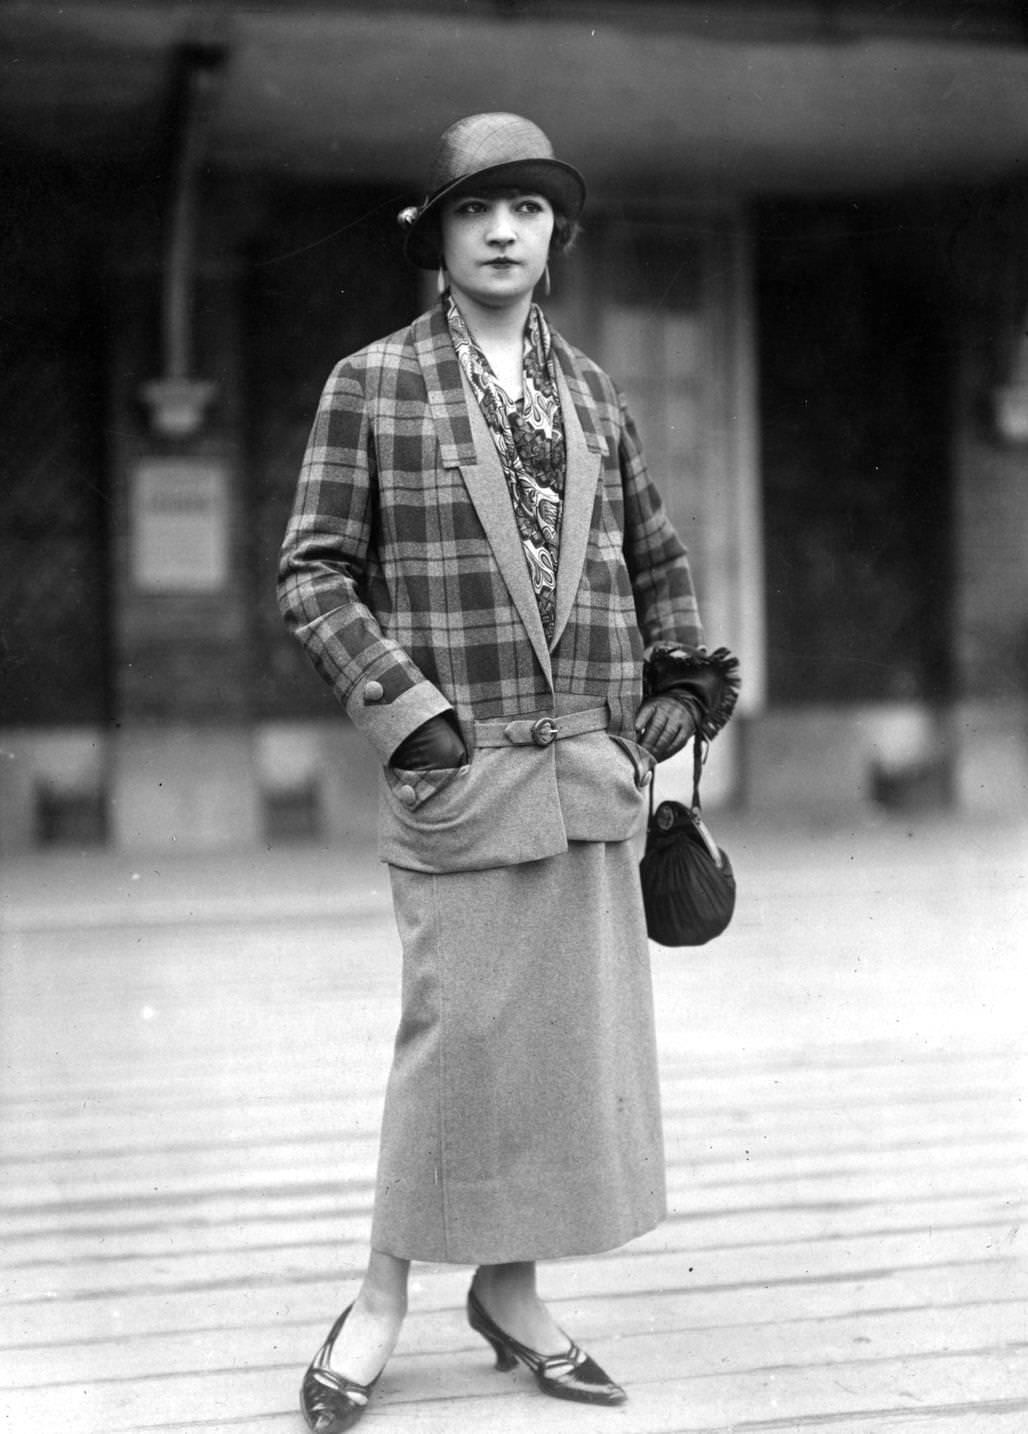 V-necked suit by Felix Dupouy. Check jacket has dropped waist worn over a plain skirt. Hat is a small brimmed cloche, small pouch shaped handbag is carried over the wrist, 1924